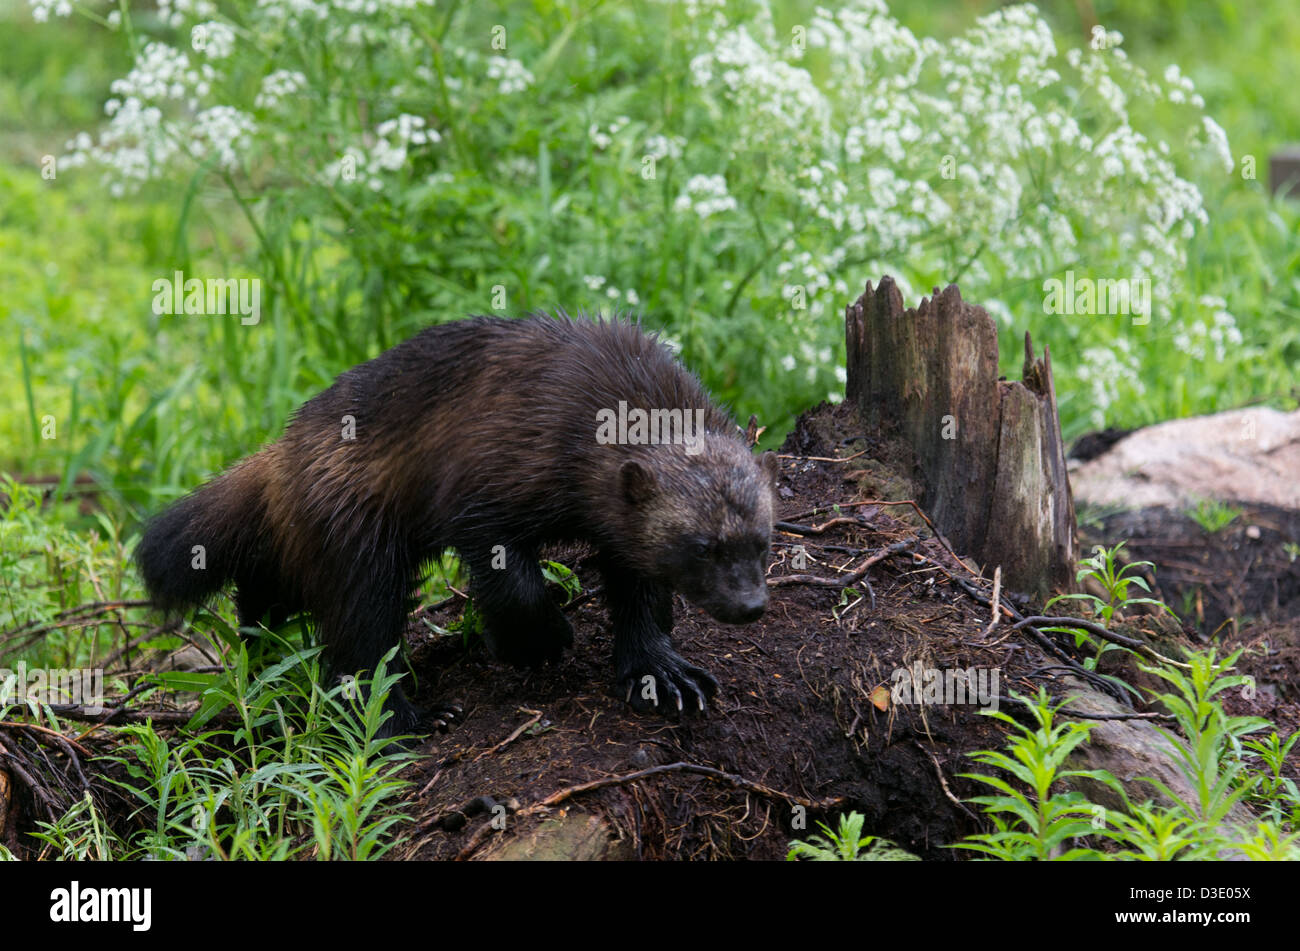 Wolverine in the wilderness Stock Photo